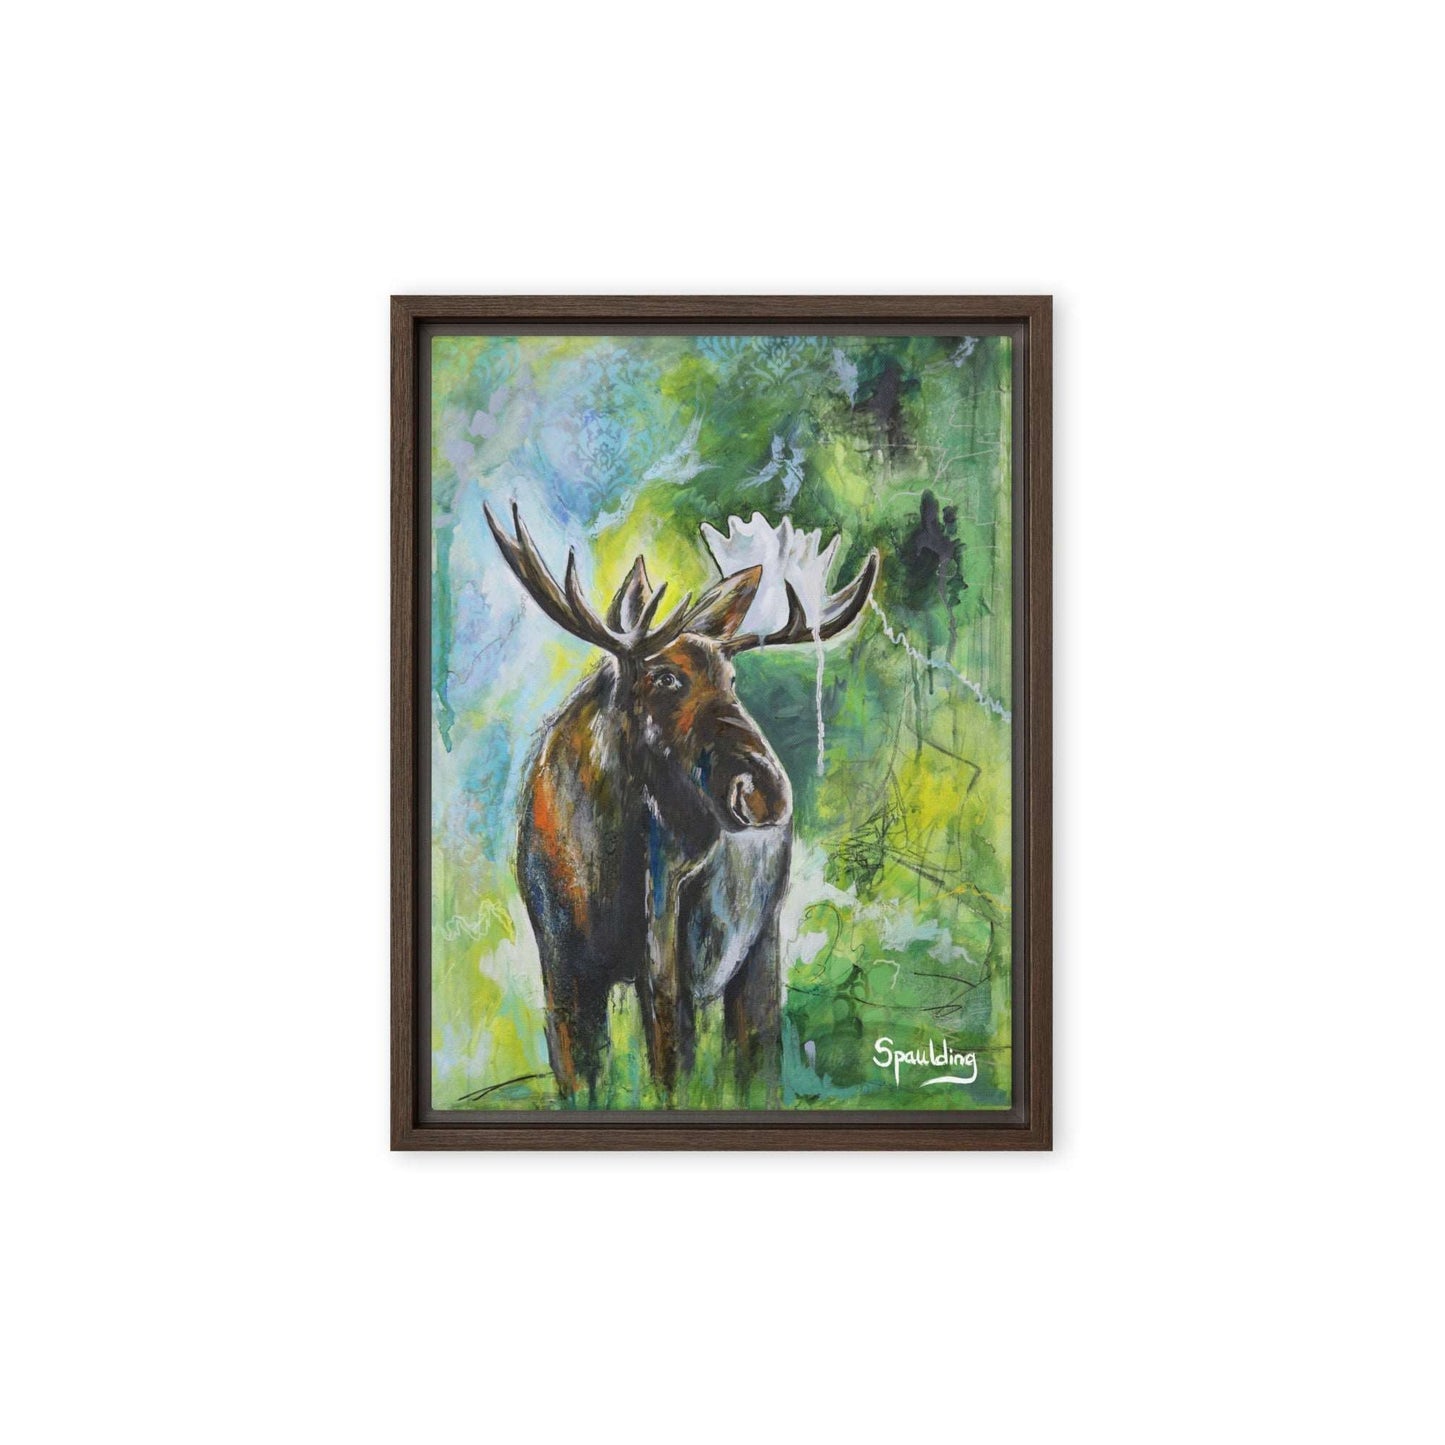 Framed canvas print of a bull moose with antlers standing in front of a green, blue and black background.